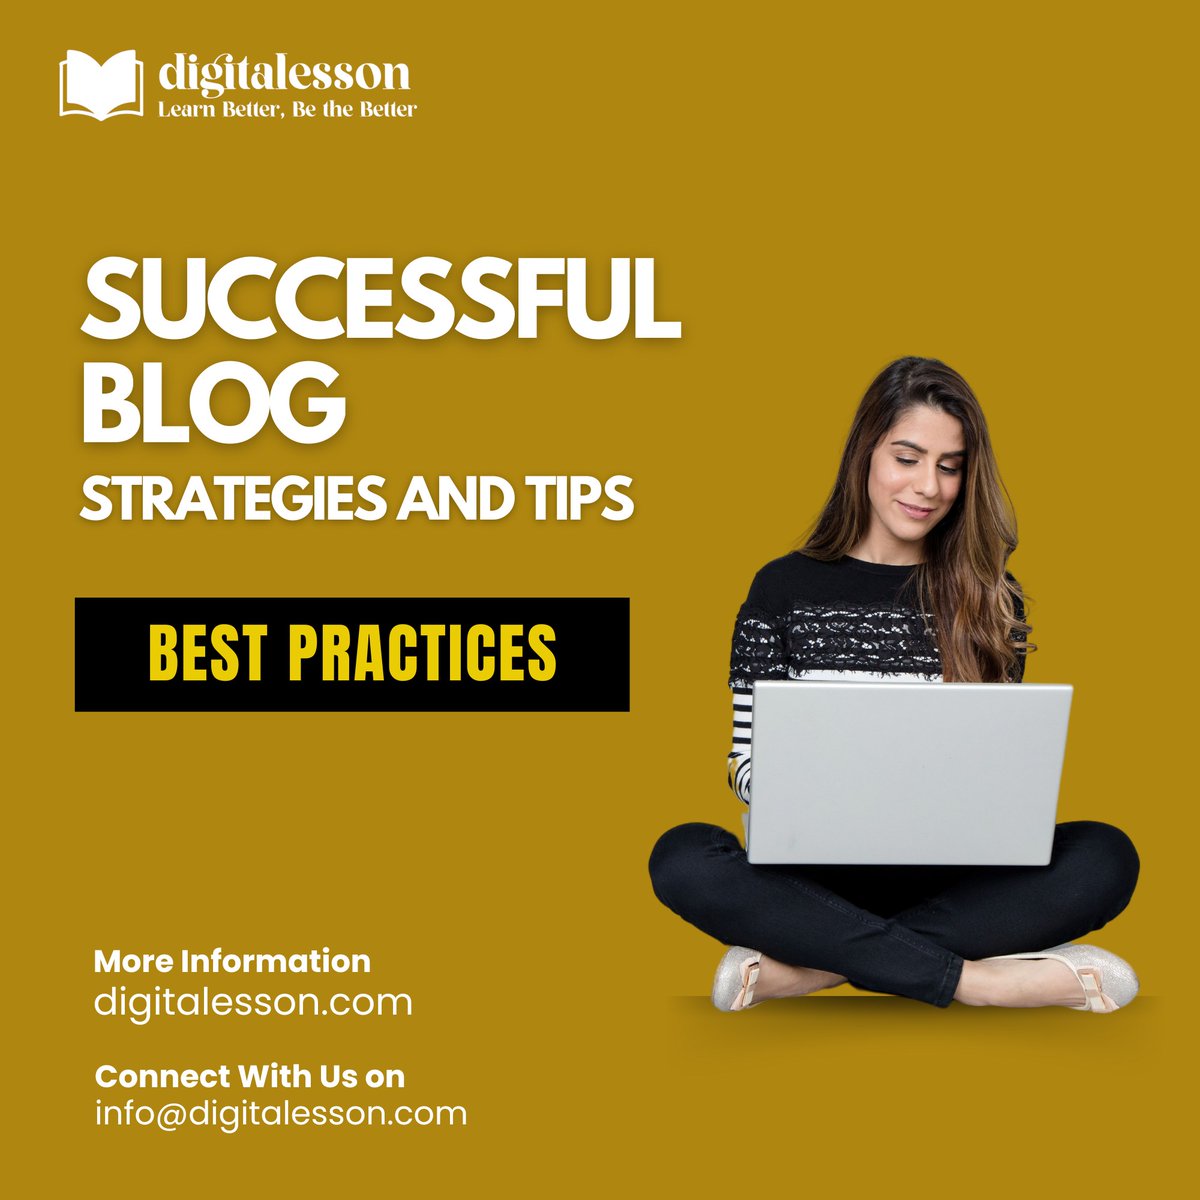 Master the art of blogging with proven strategies and tips shared by DigitaLesson. 
.
Website: digitalesson.com
.
#digitalesson #BloggersLife #OnlineSuccess #KnowledgeIsPower #BloggingSuccess #ContentCreation #LearnFromTheBest #BloggingTips #DigitalMarketing #Success